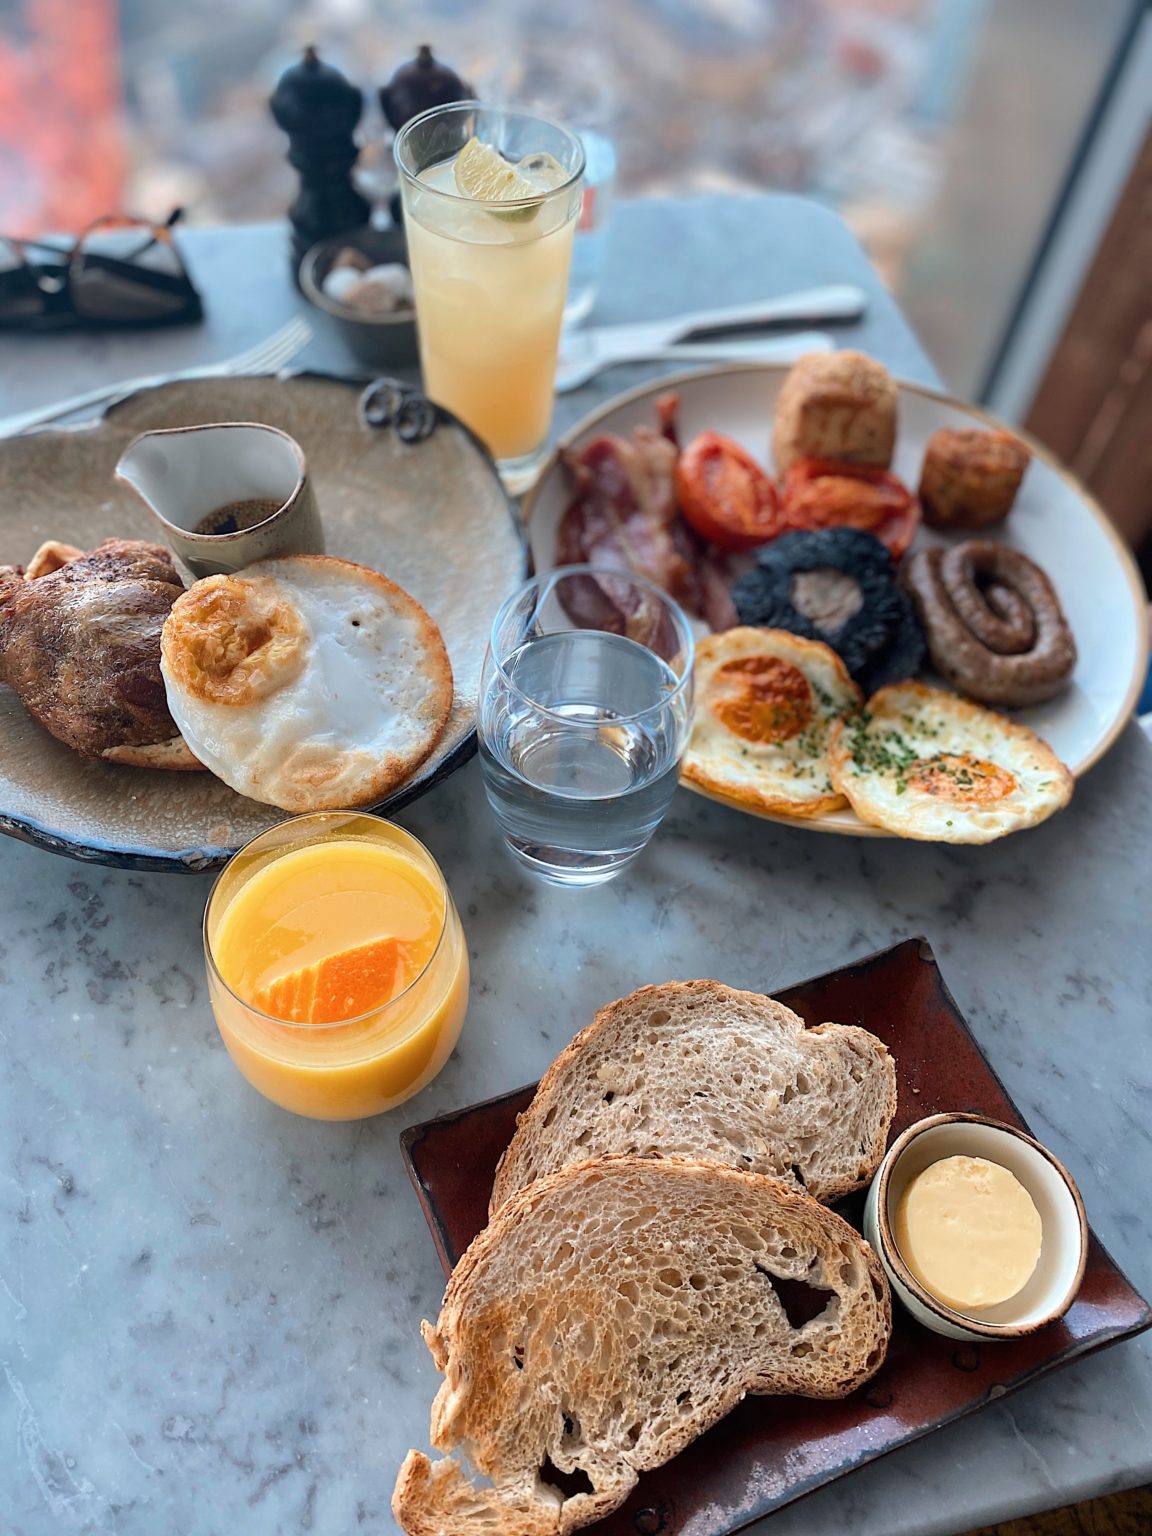 The Best Brunch Spots in London - Life With Bugo